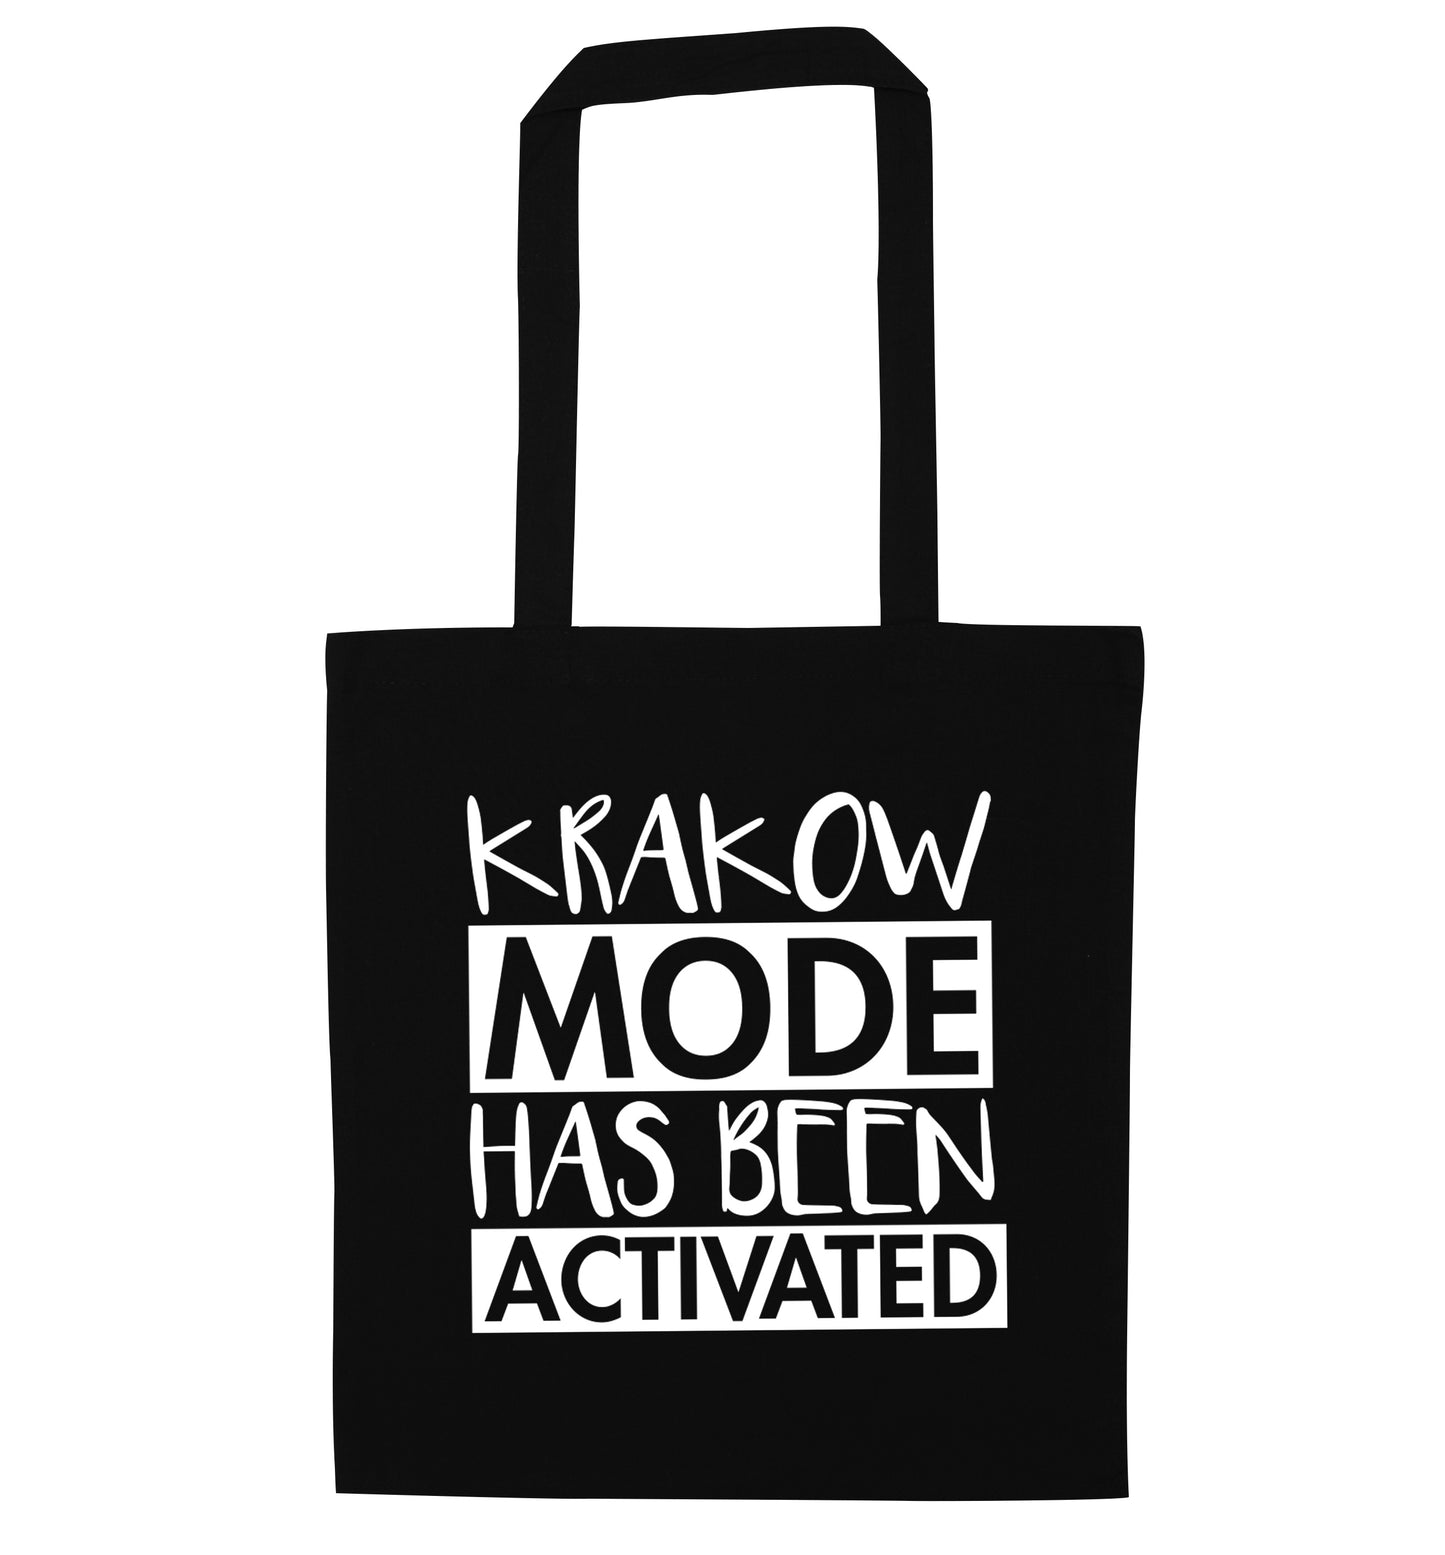 Krakow mode has been activated black tote bag